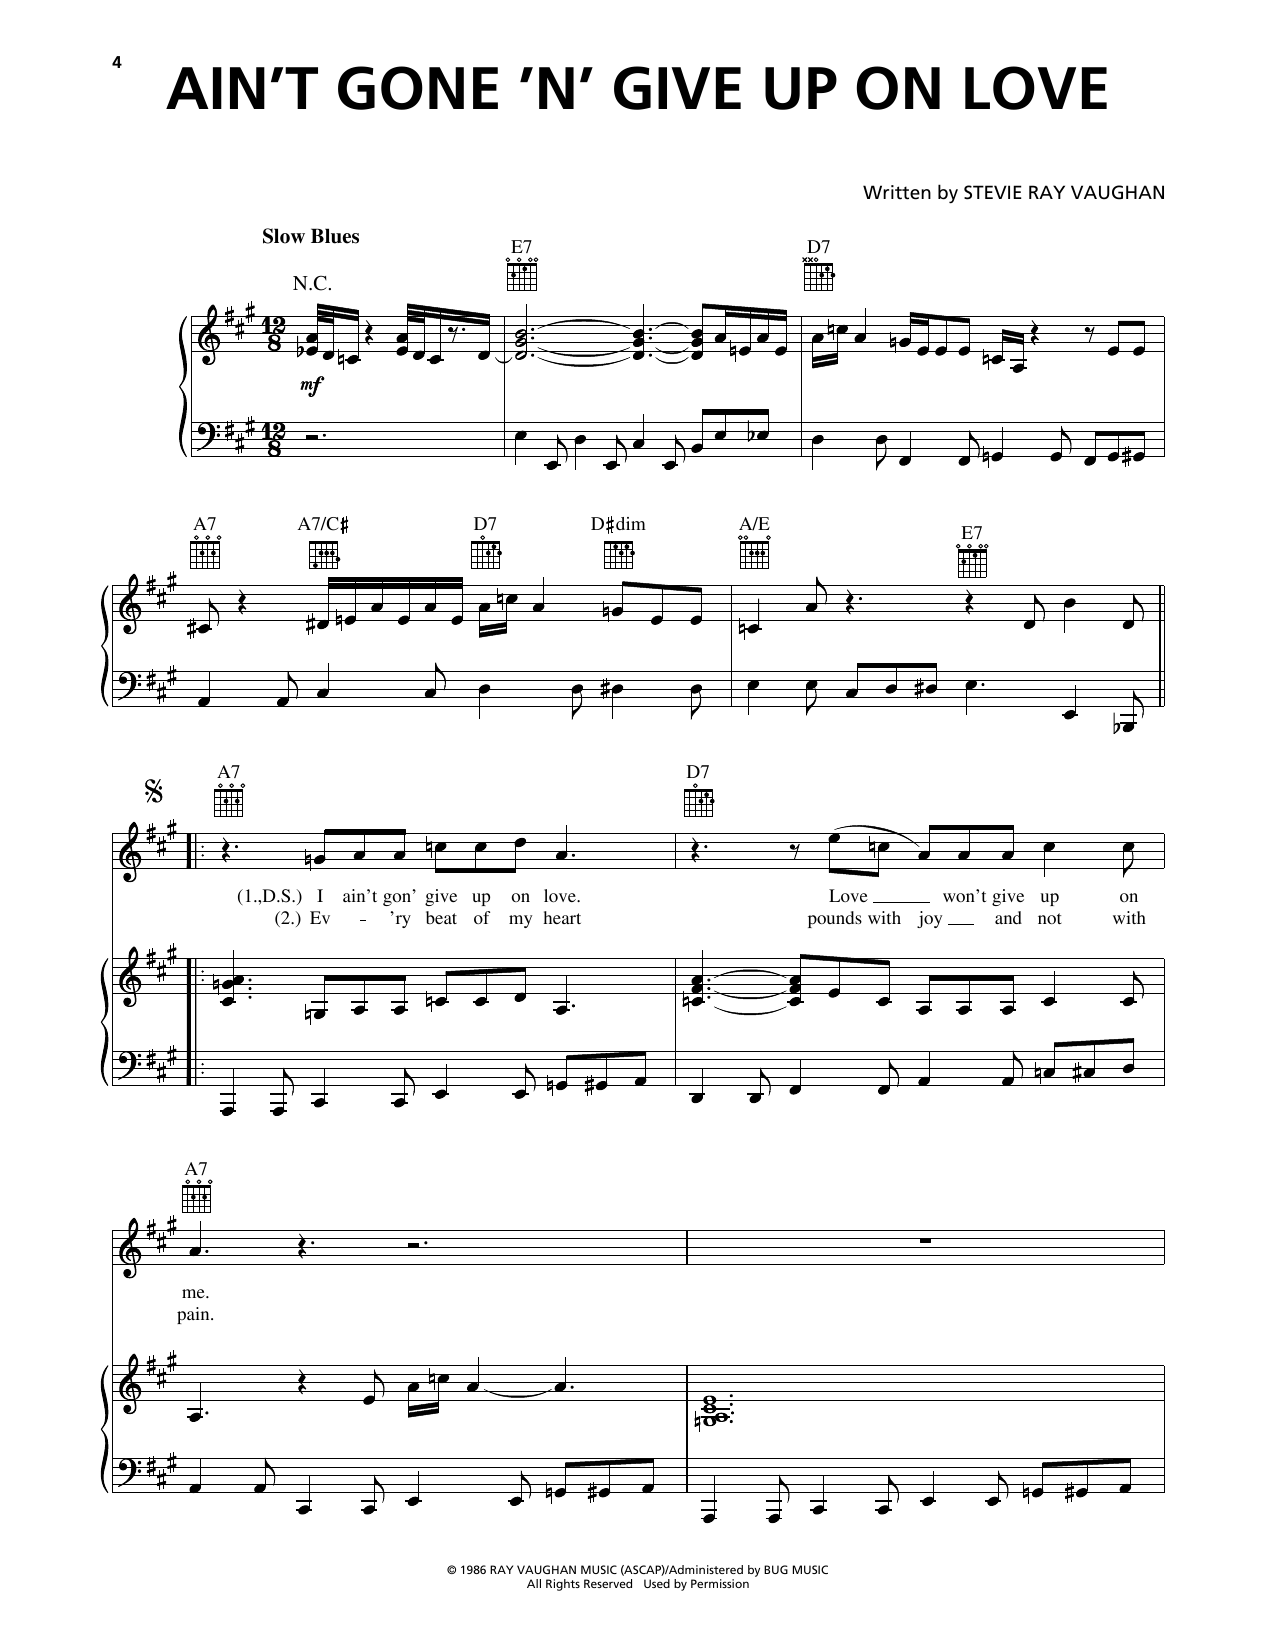 Download Stevie Ray Vaughan Ain't Gone 'n' Give Up On Love Sheet Music